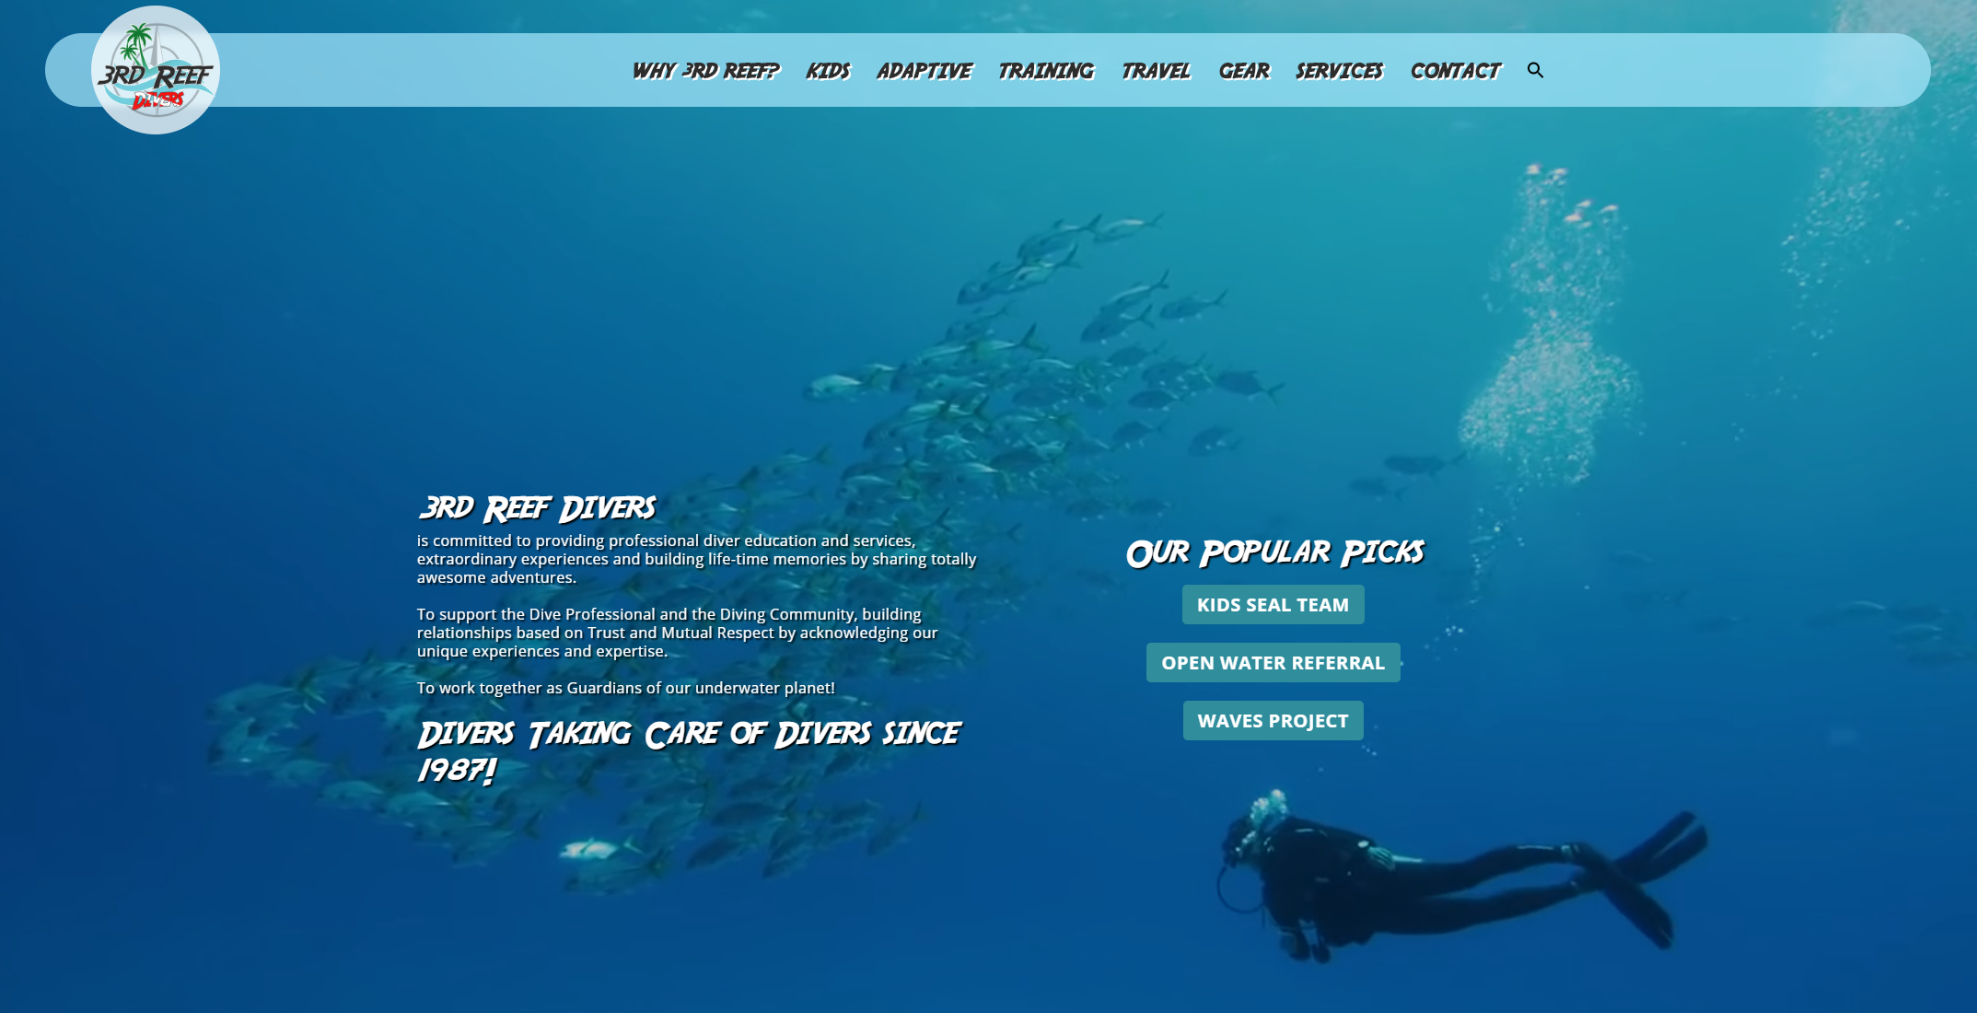 Las vegas website development by 702 pros llc for 3rd reef divers | justin young